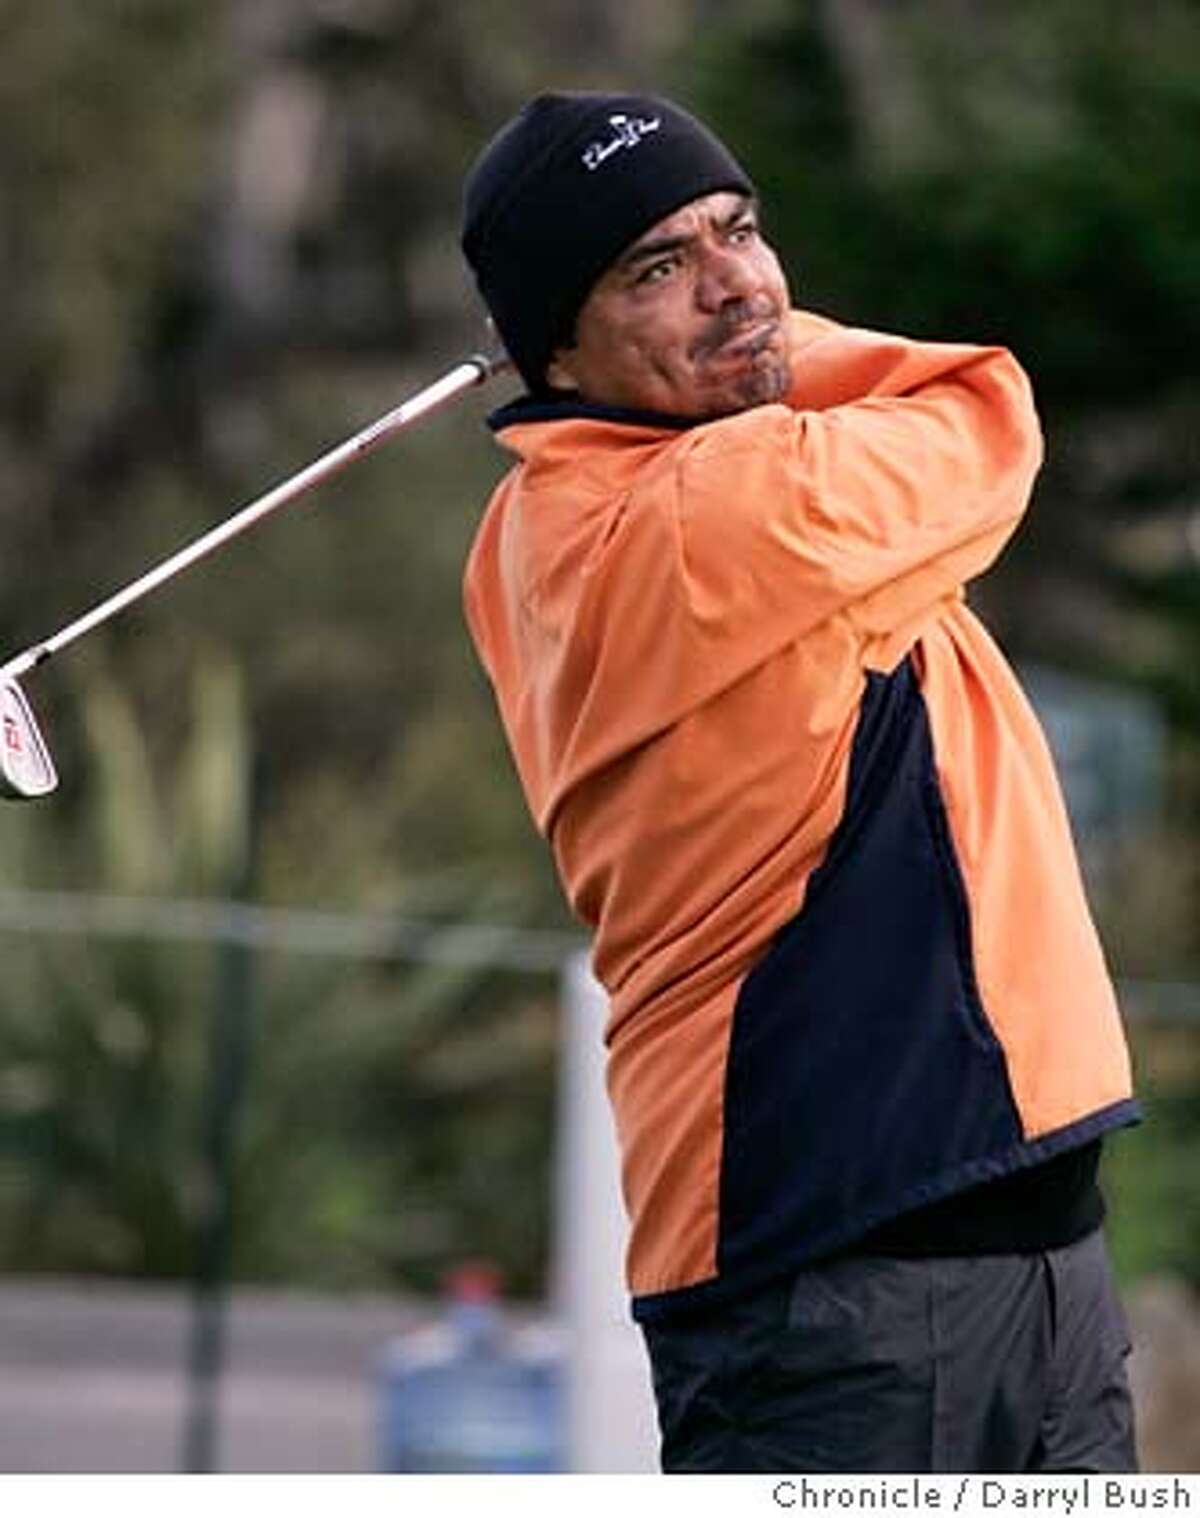 AT&Tgolf_0009_db.JPG Actor George Lopez hits his tee shot on the 17th hole at Pebble Beach, during a Tuesday practice round for the 2007 AT&T Pebble Beach National Pro-Am at Pebble Beach Golf Links in Pebble Beach, CA, on Tuesday, February, 6, 2007. photo taken: 2/6/07 Darryl Bush / The Chronicle ** (cq) MANDATORY CREDIT FOR PHOTOG AND SF CHRONICLE/ -MAGS OUT